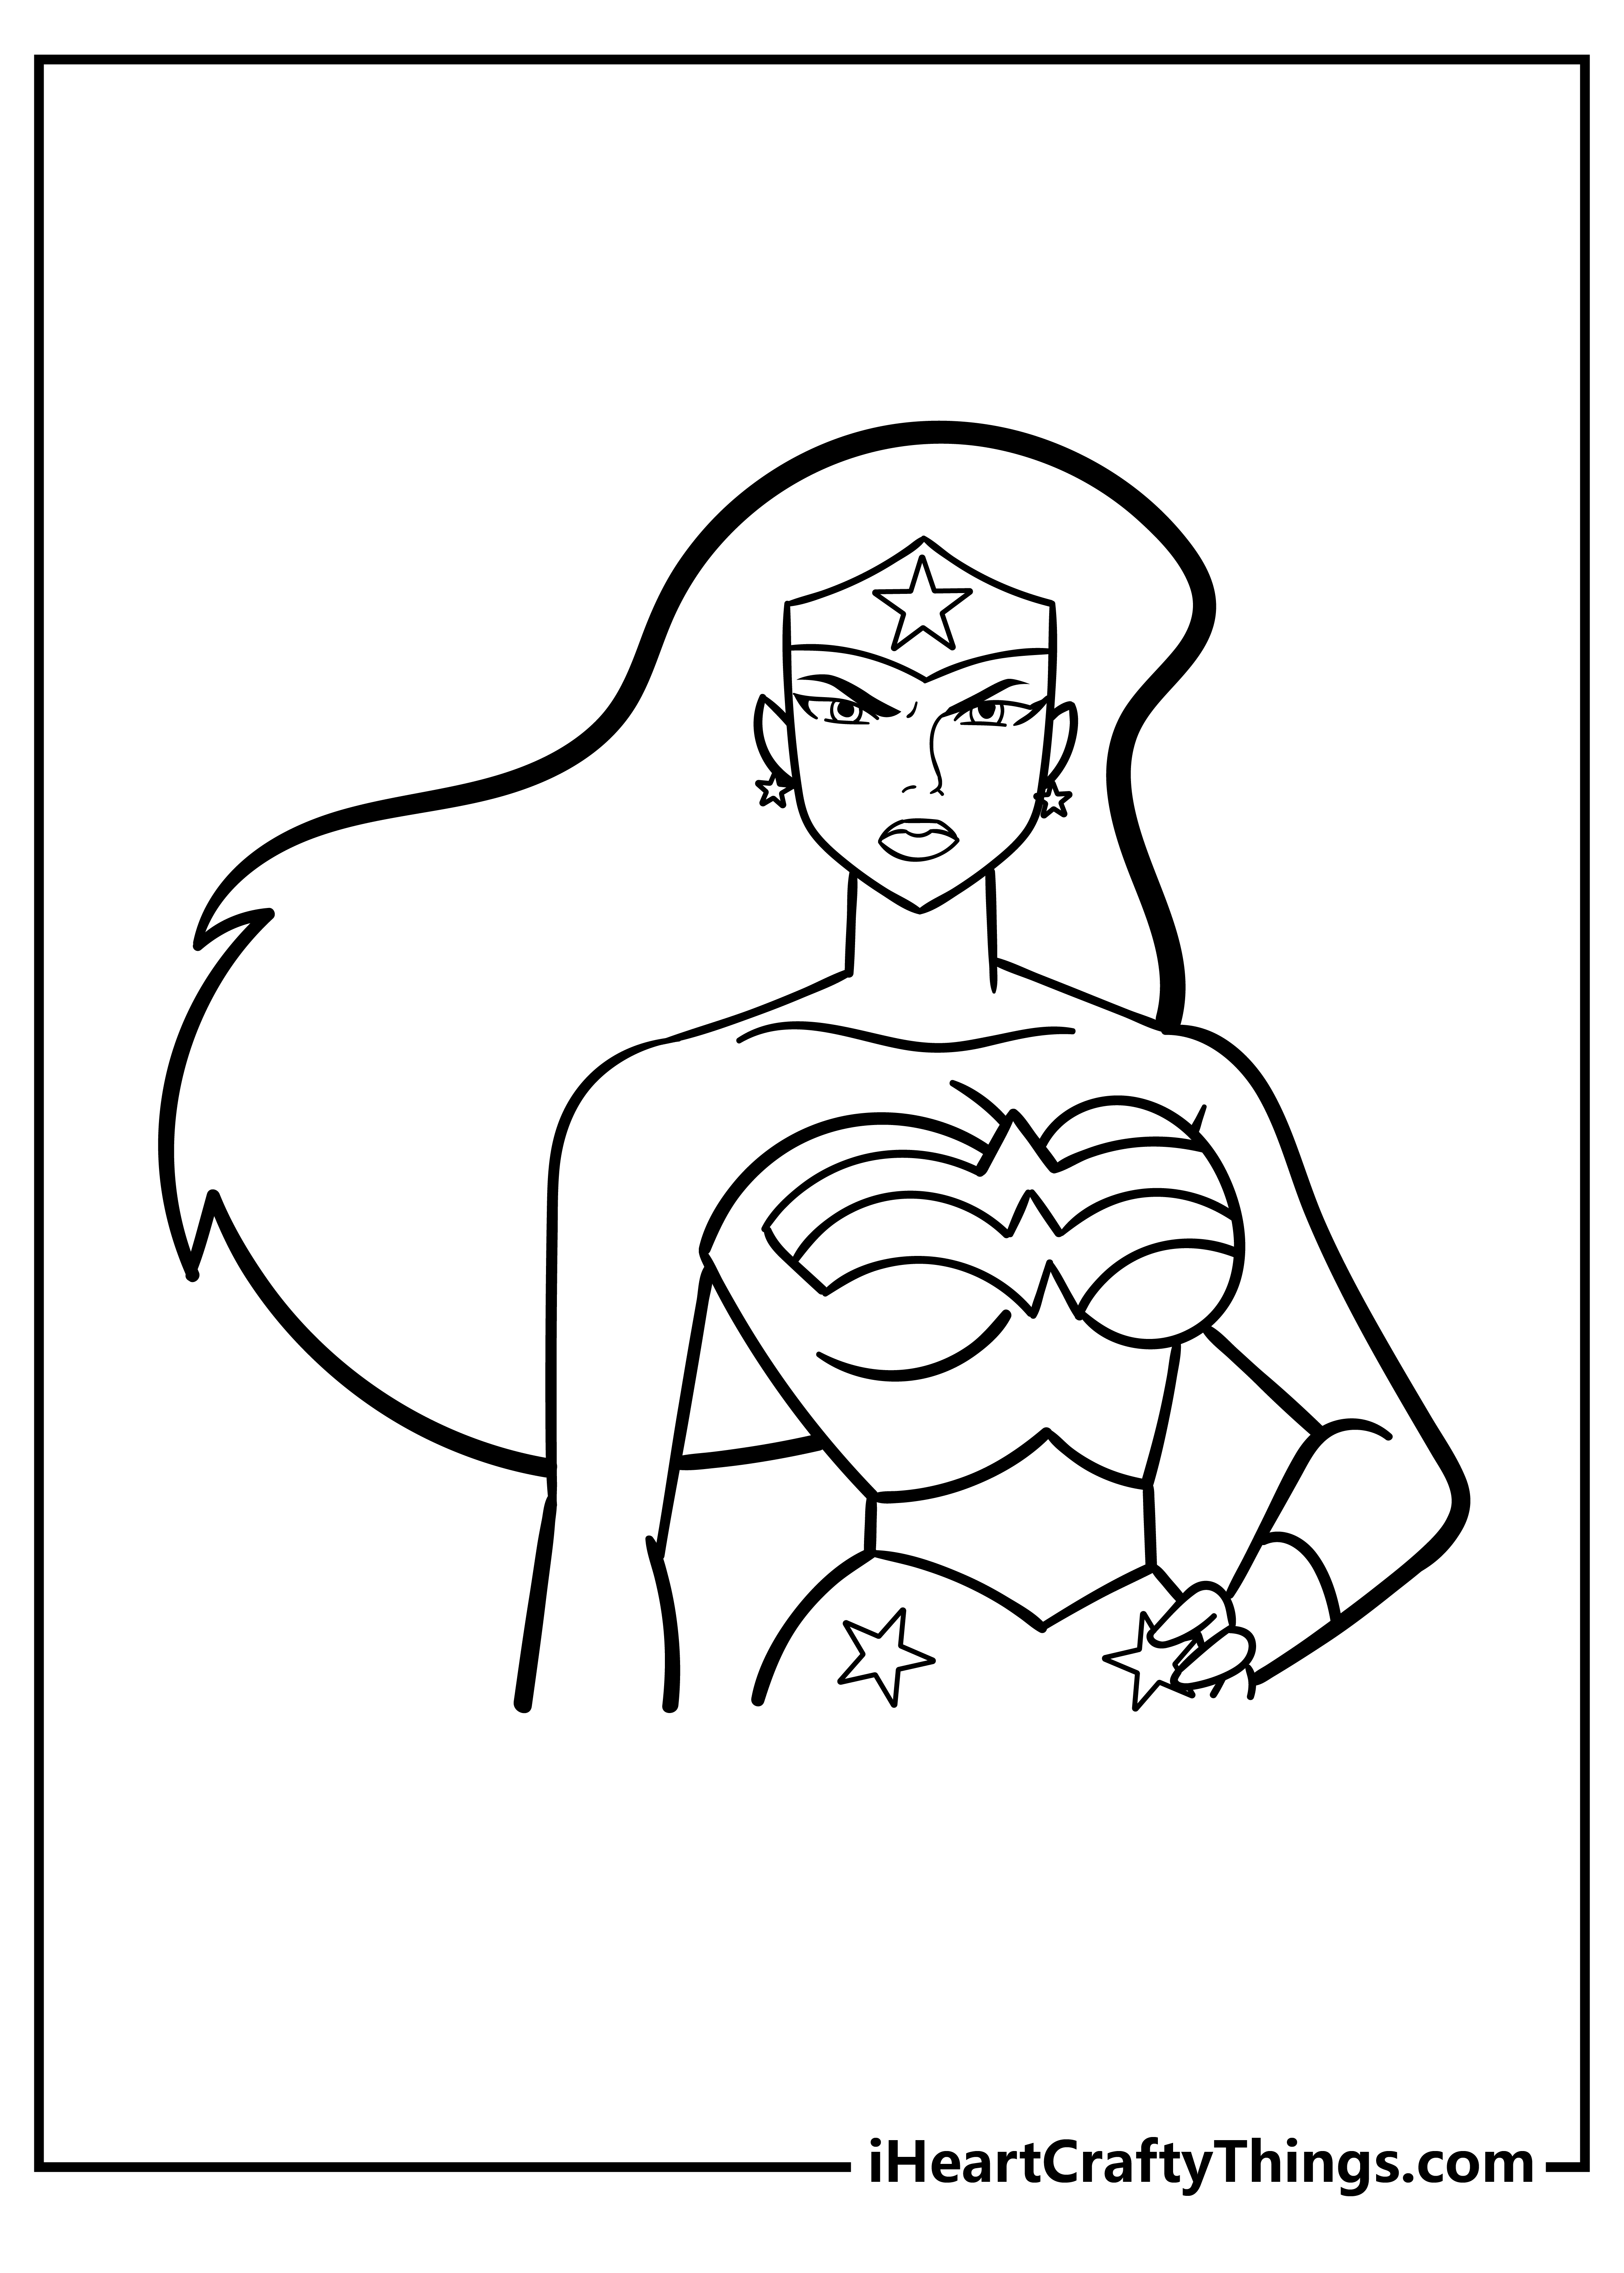 Wonder Woman Coloring Pages for kids free download